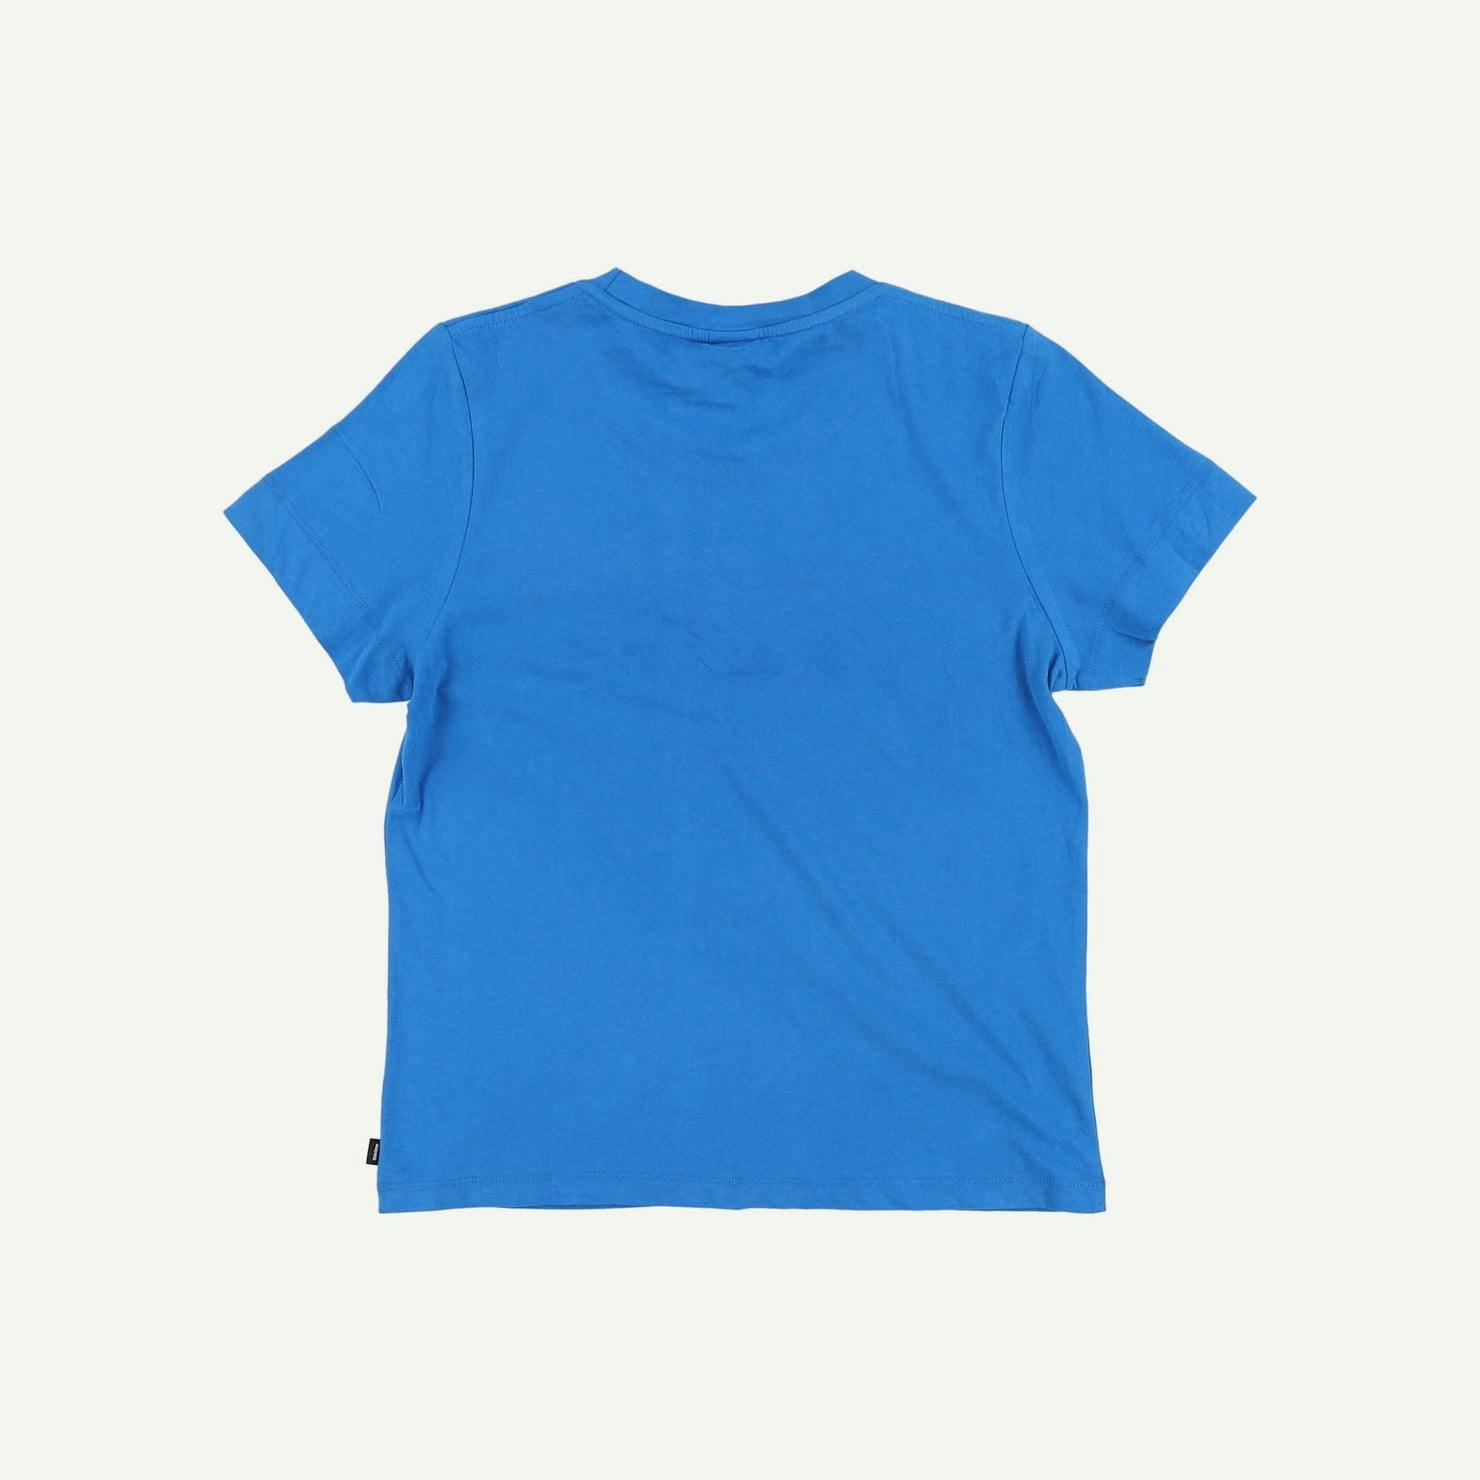 Finisterre Pre-loved Blue T-shirt